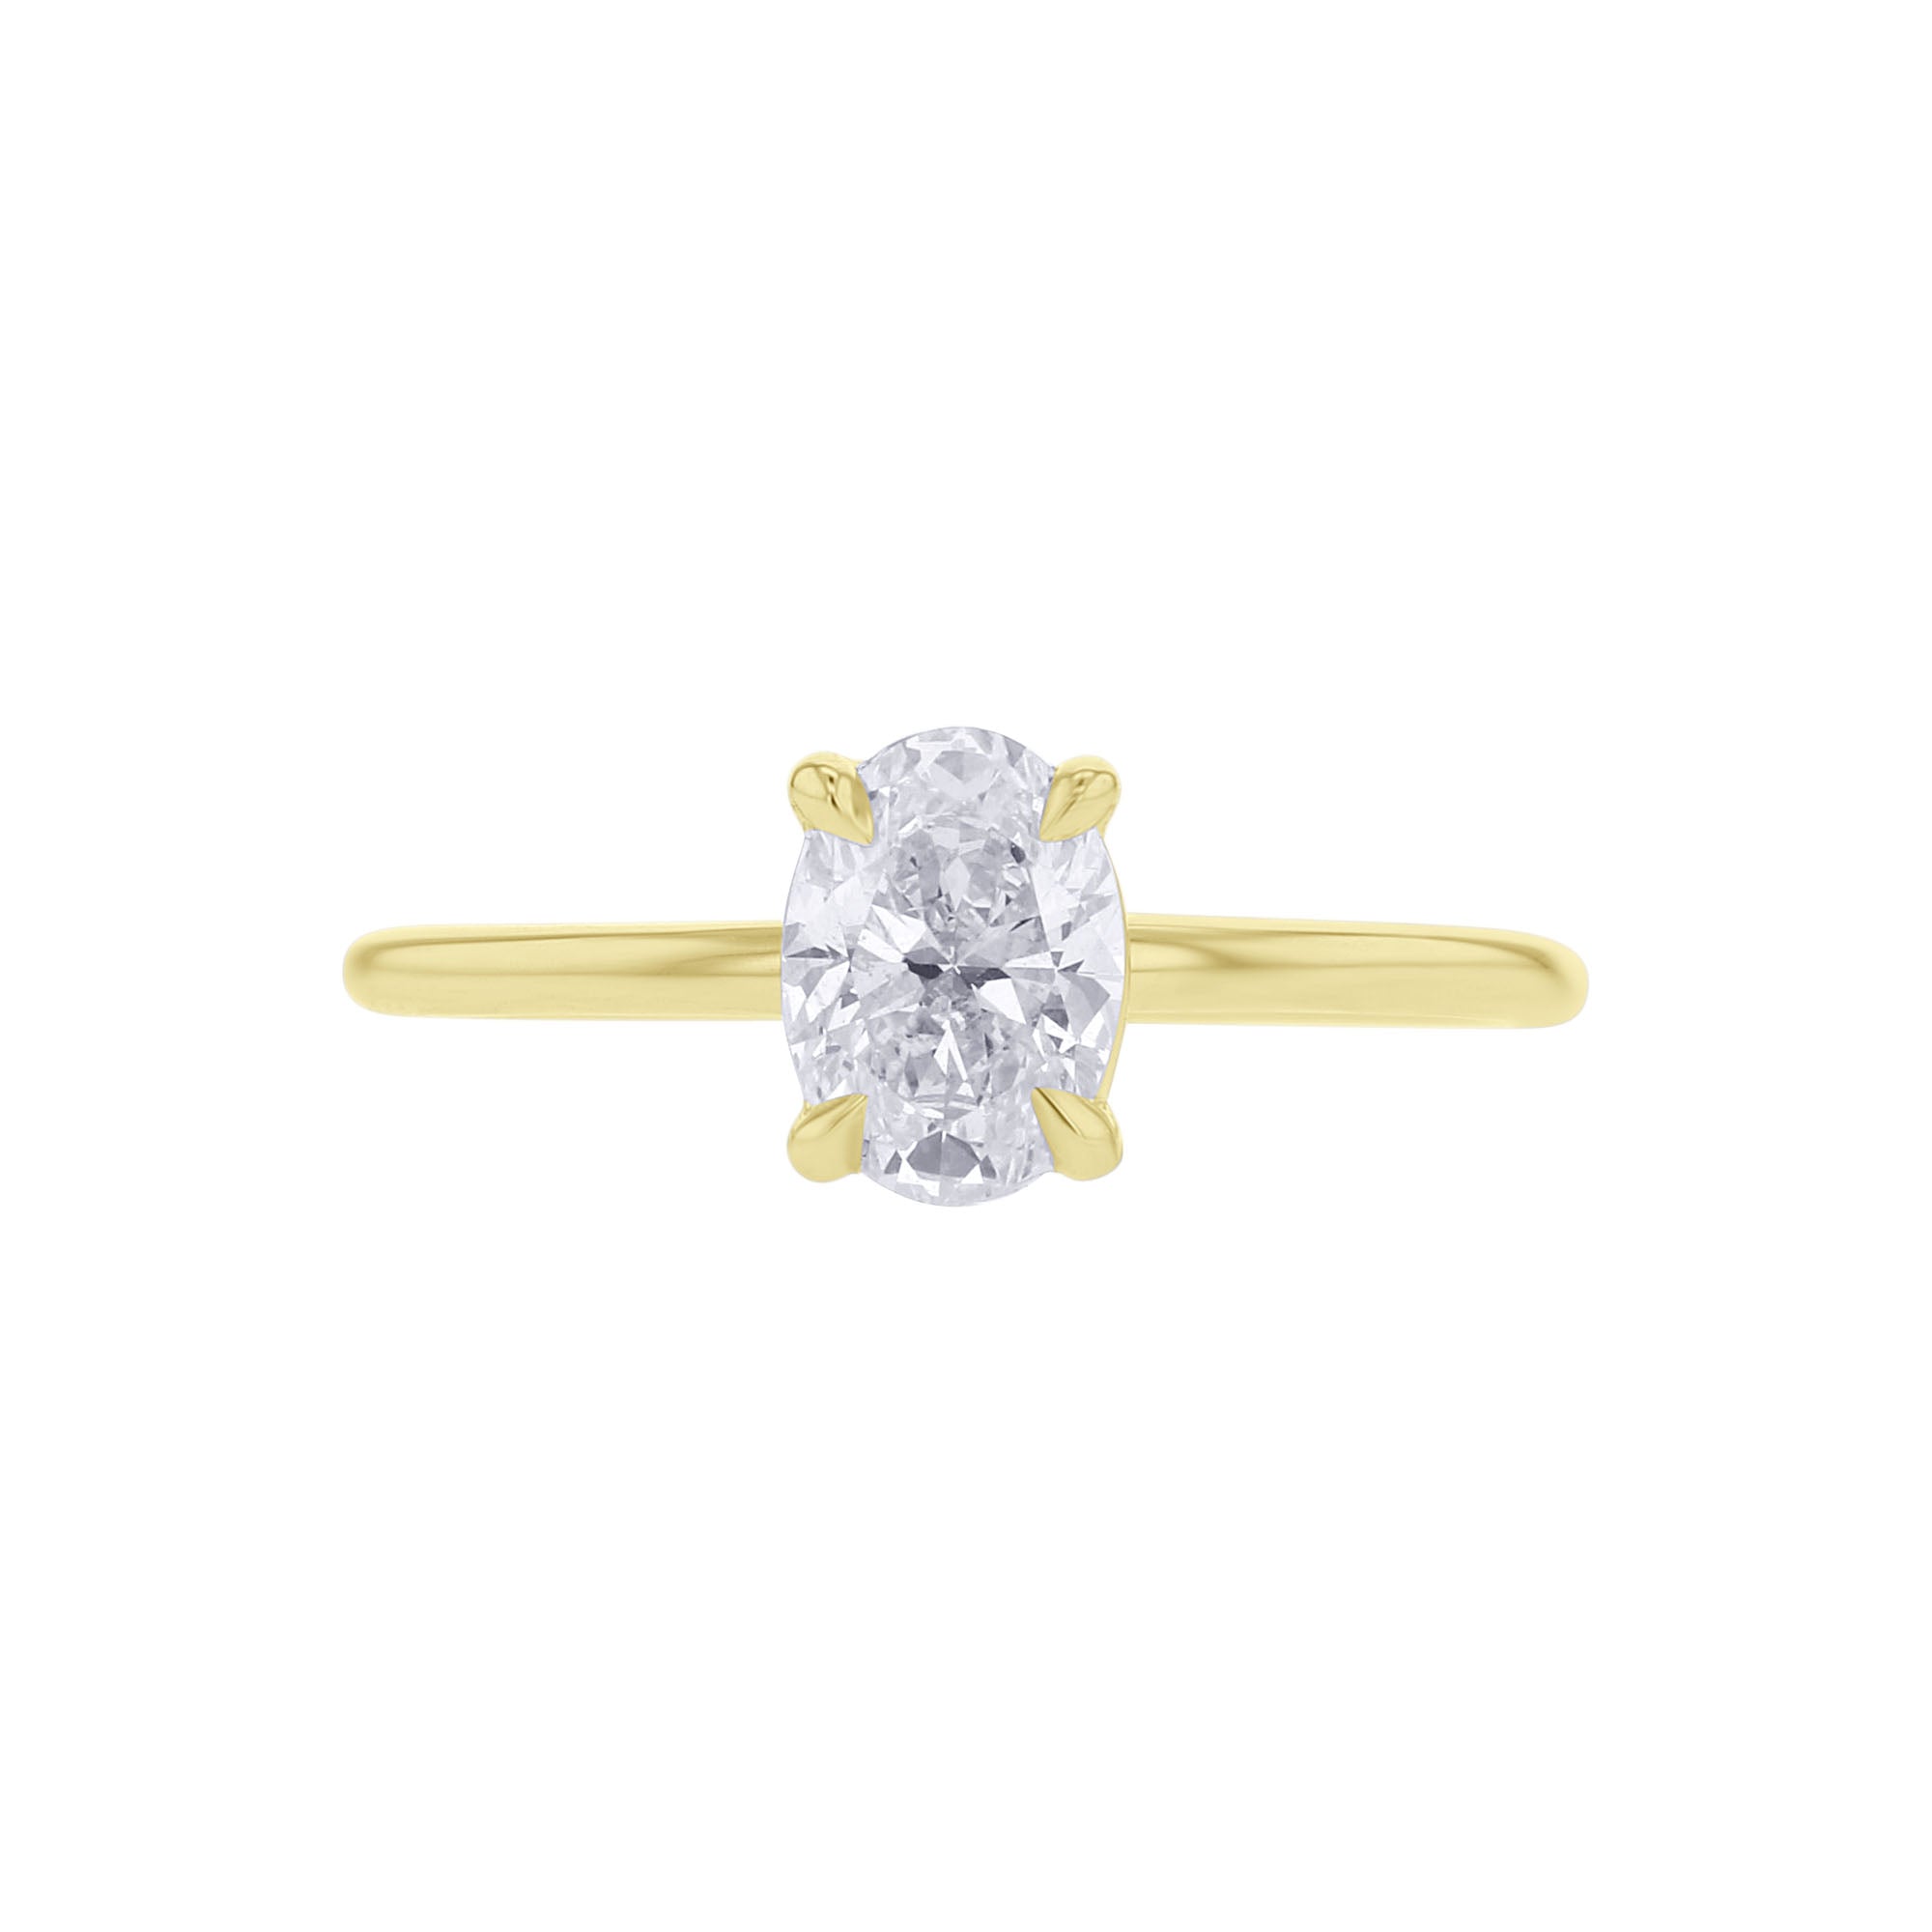 Ember Oval Ready for Love Diamond Engagement Ring 1ct